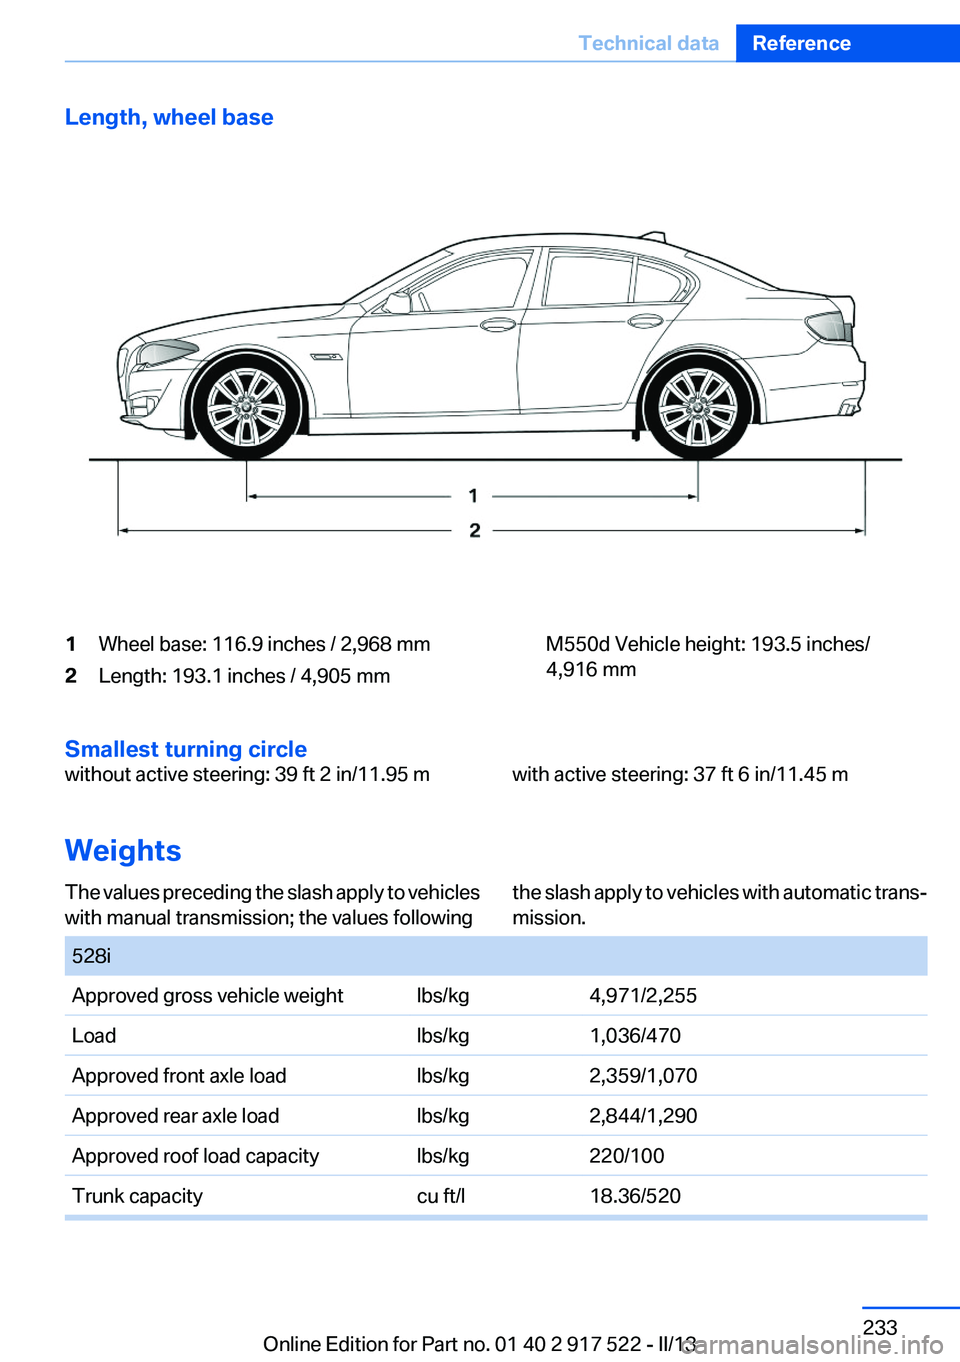 BMW 528I XDRIVE 2013  Owners Manual Length, wheel base1Wheel base: 116.9 inches / 2,968 mm2Length: 193.1 inches / 4,905 mmM550d Vehicle height: 193.5 inches/
4,916 mm
Smallest turning circle
without active steering: 39 ft 2 in/11.95 mwi